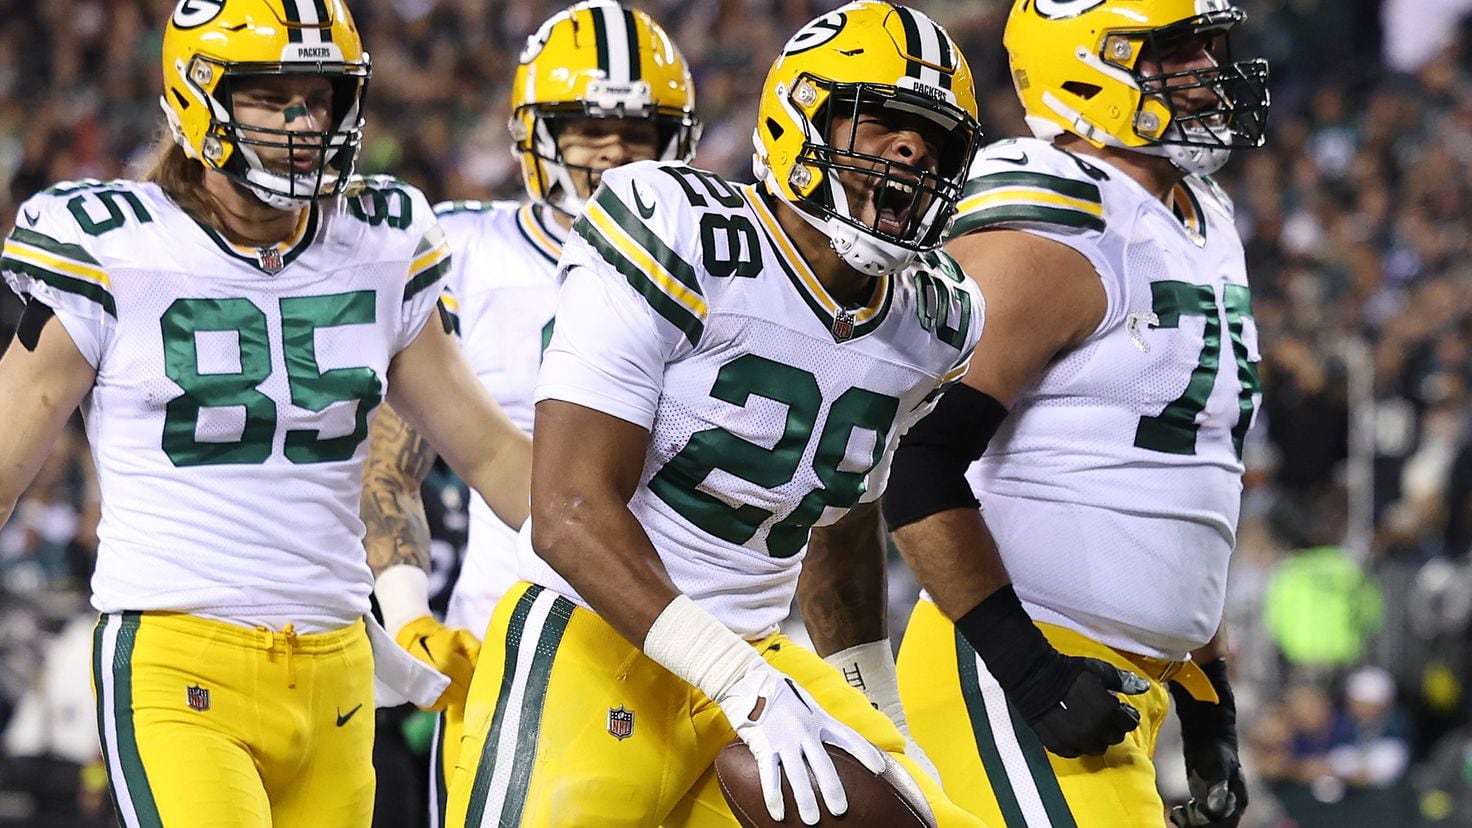 Can the Green Bay Packers still make the playoffs? What are the chances